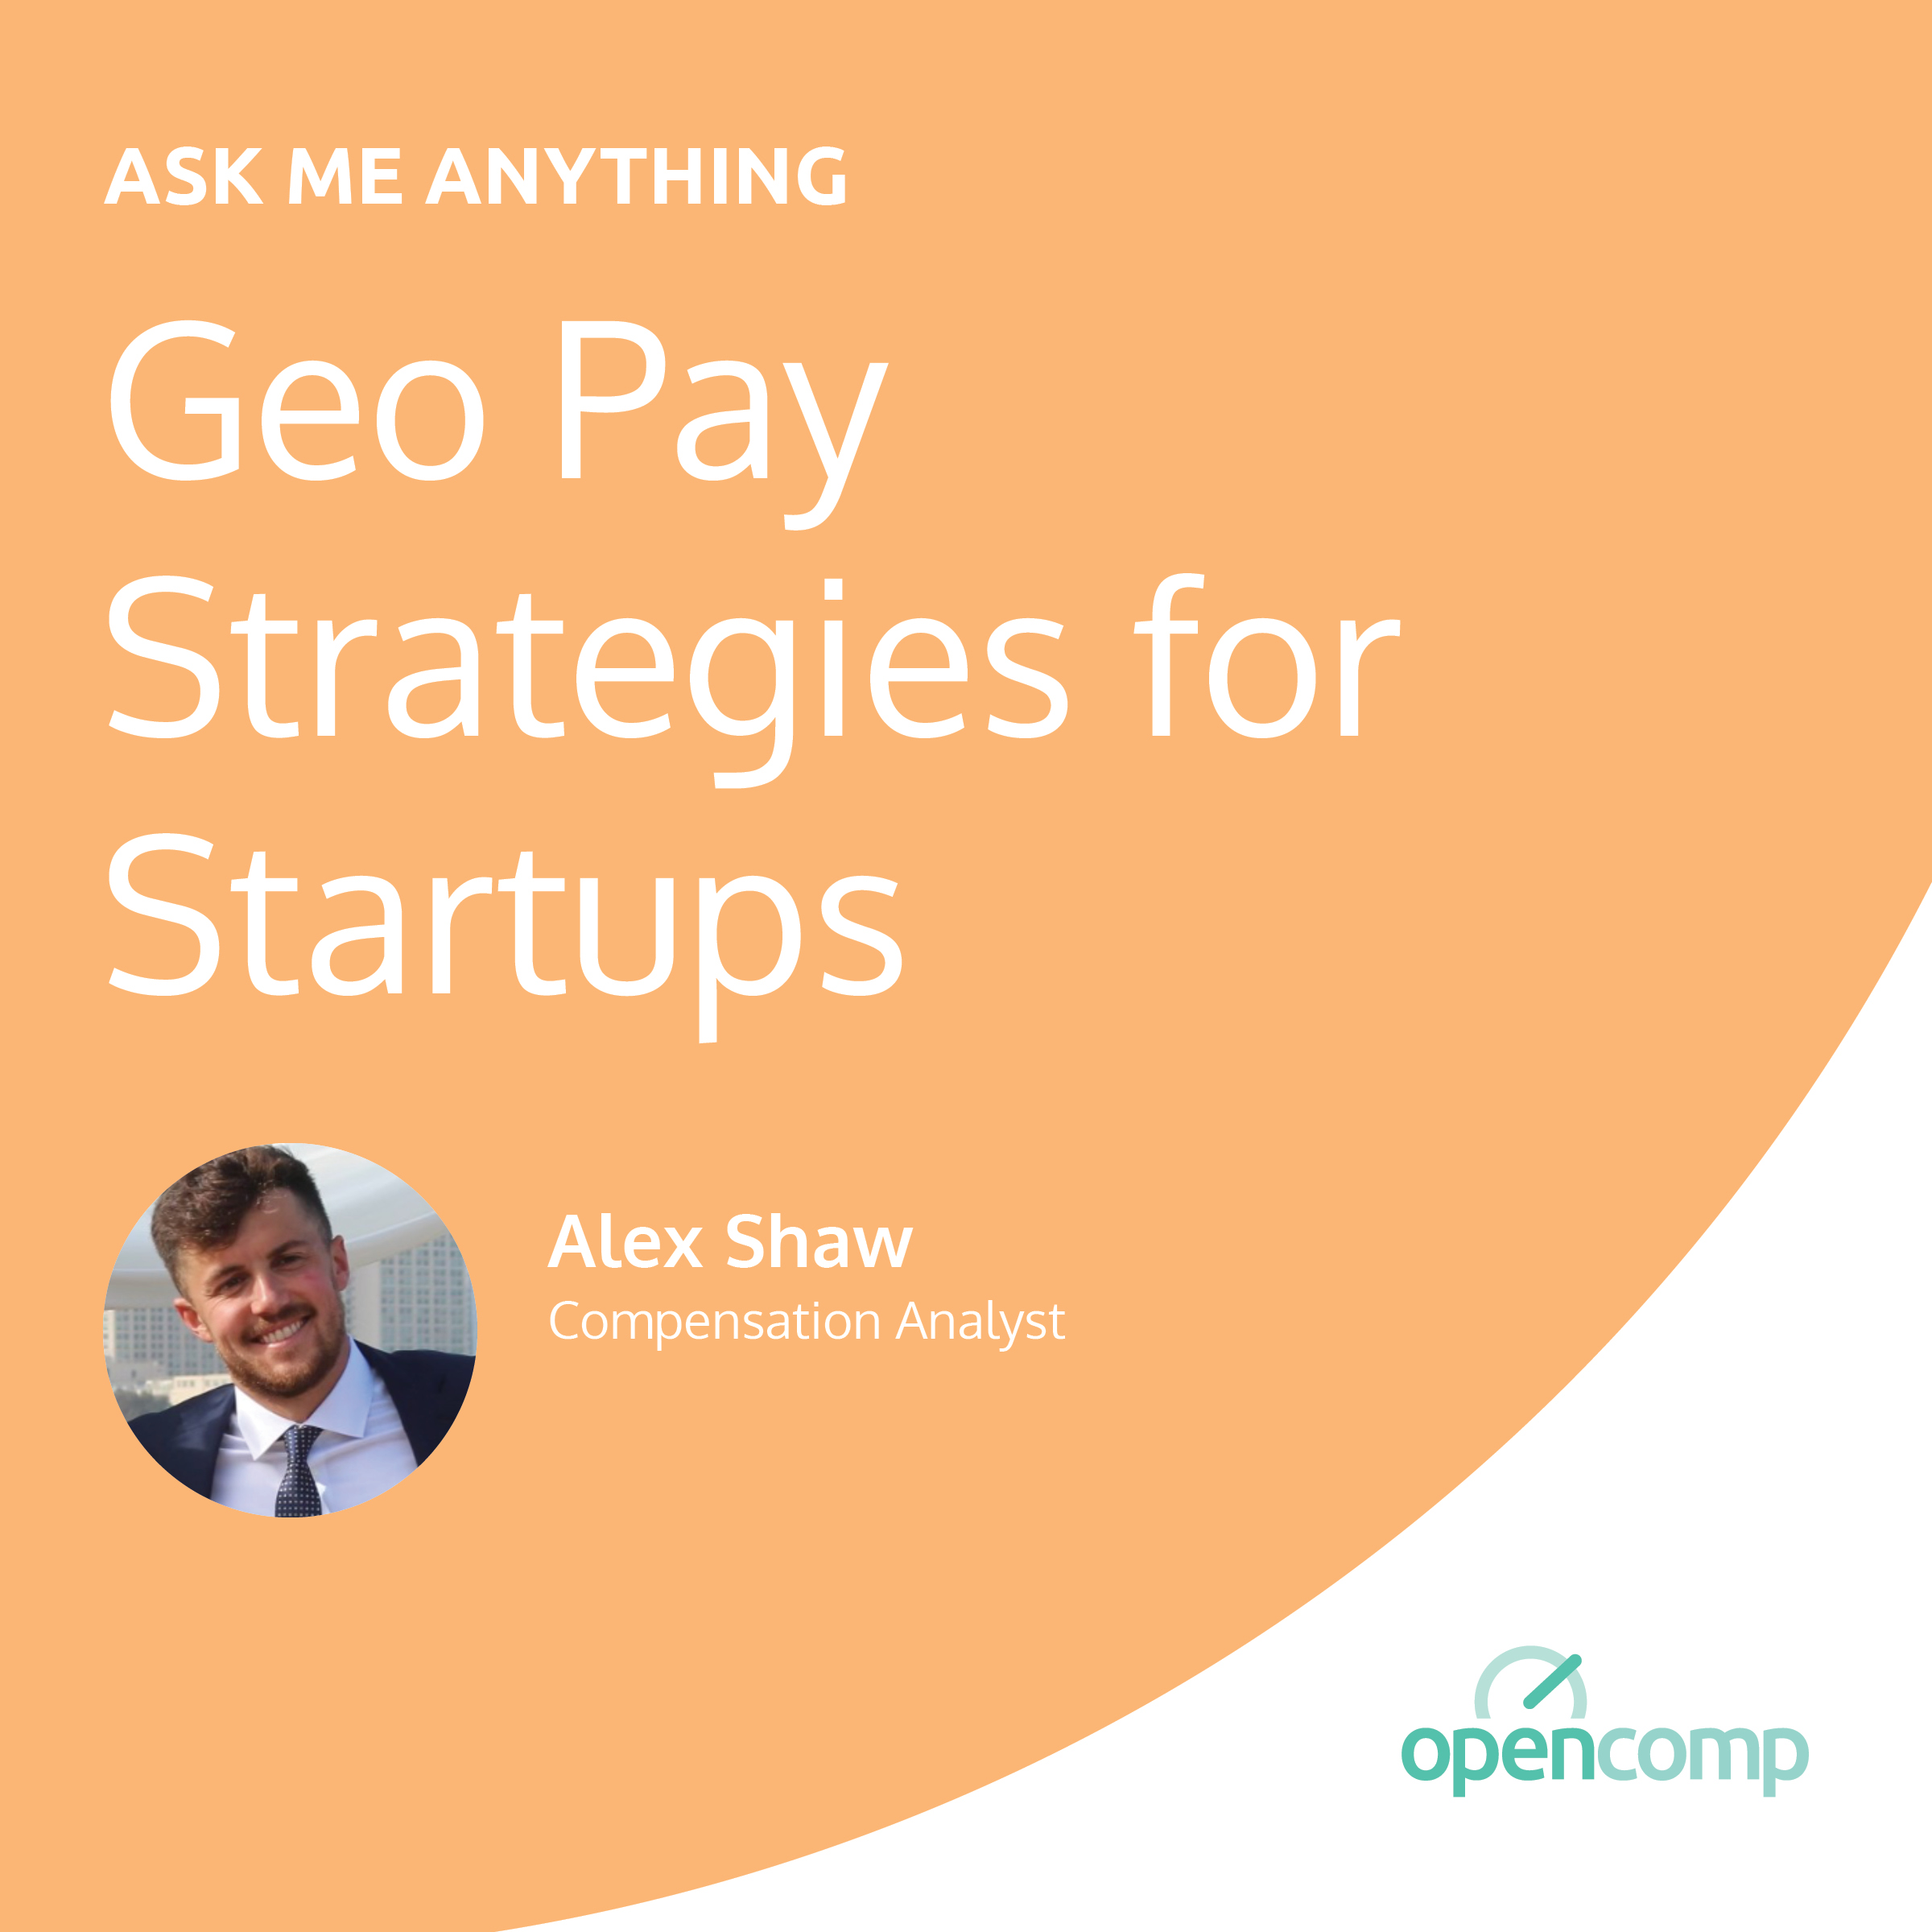 AMA: Geo Pay Strategies for Startups